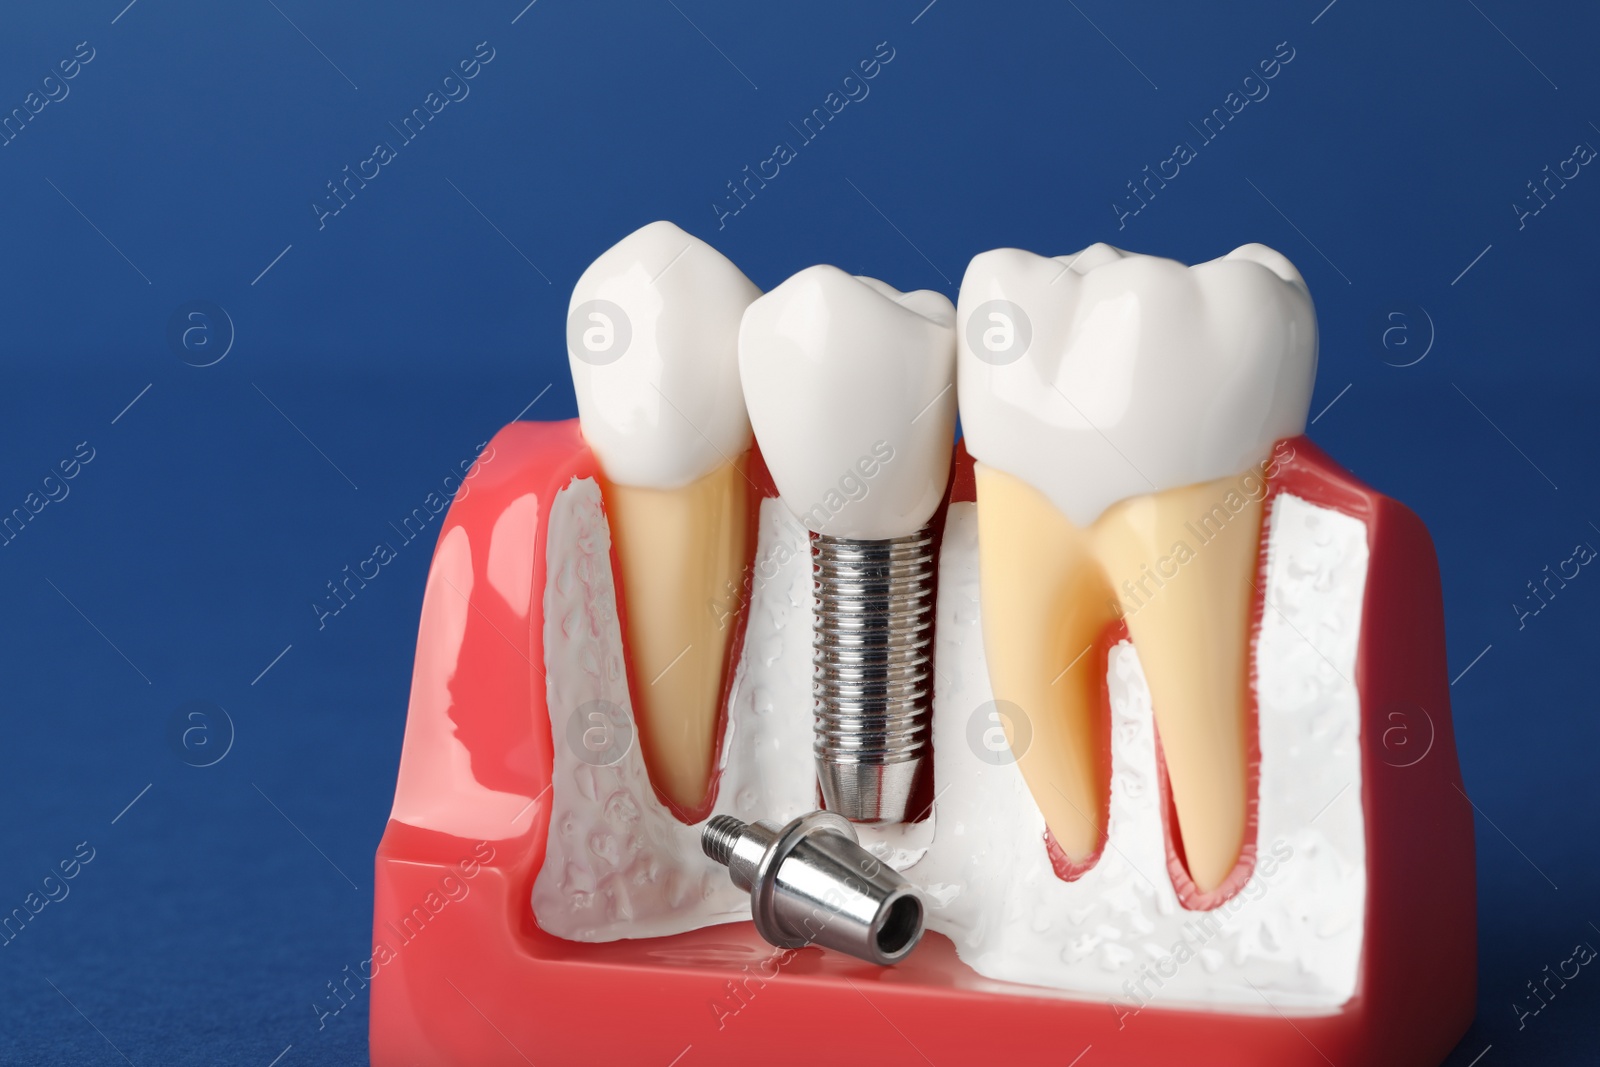 Photo of Educational model of gum with dental implant between teeth on blue background, closeup